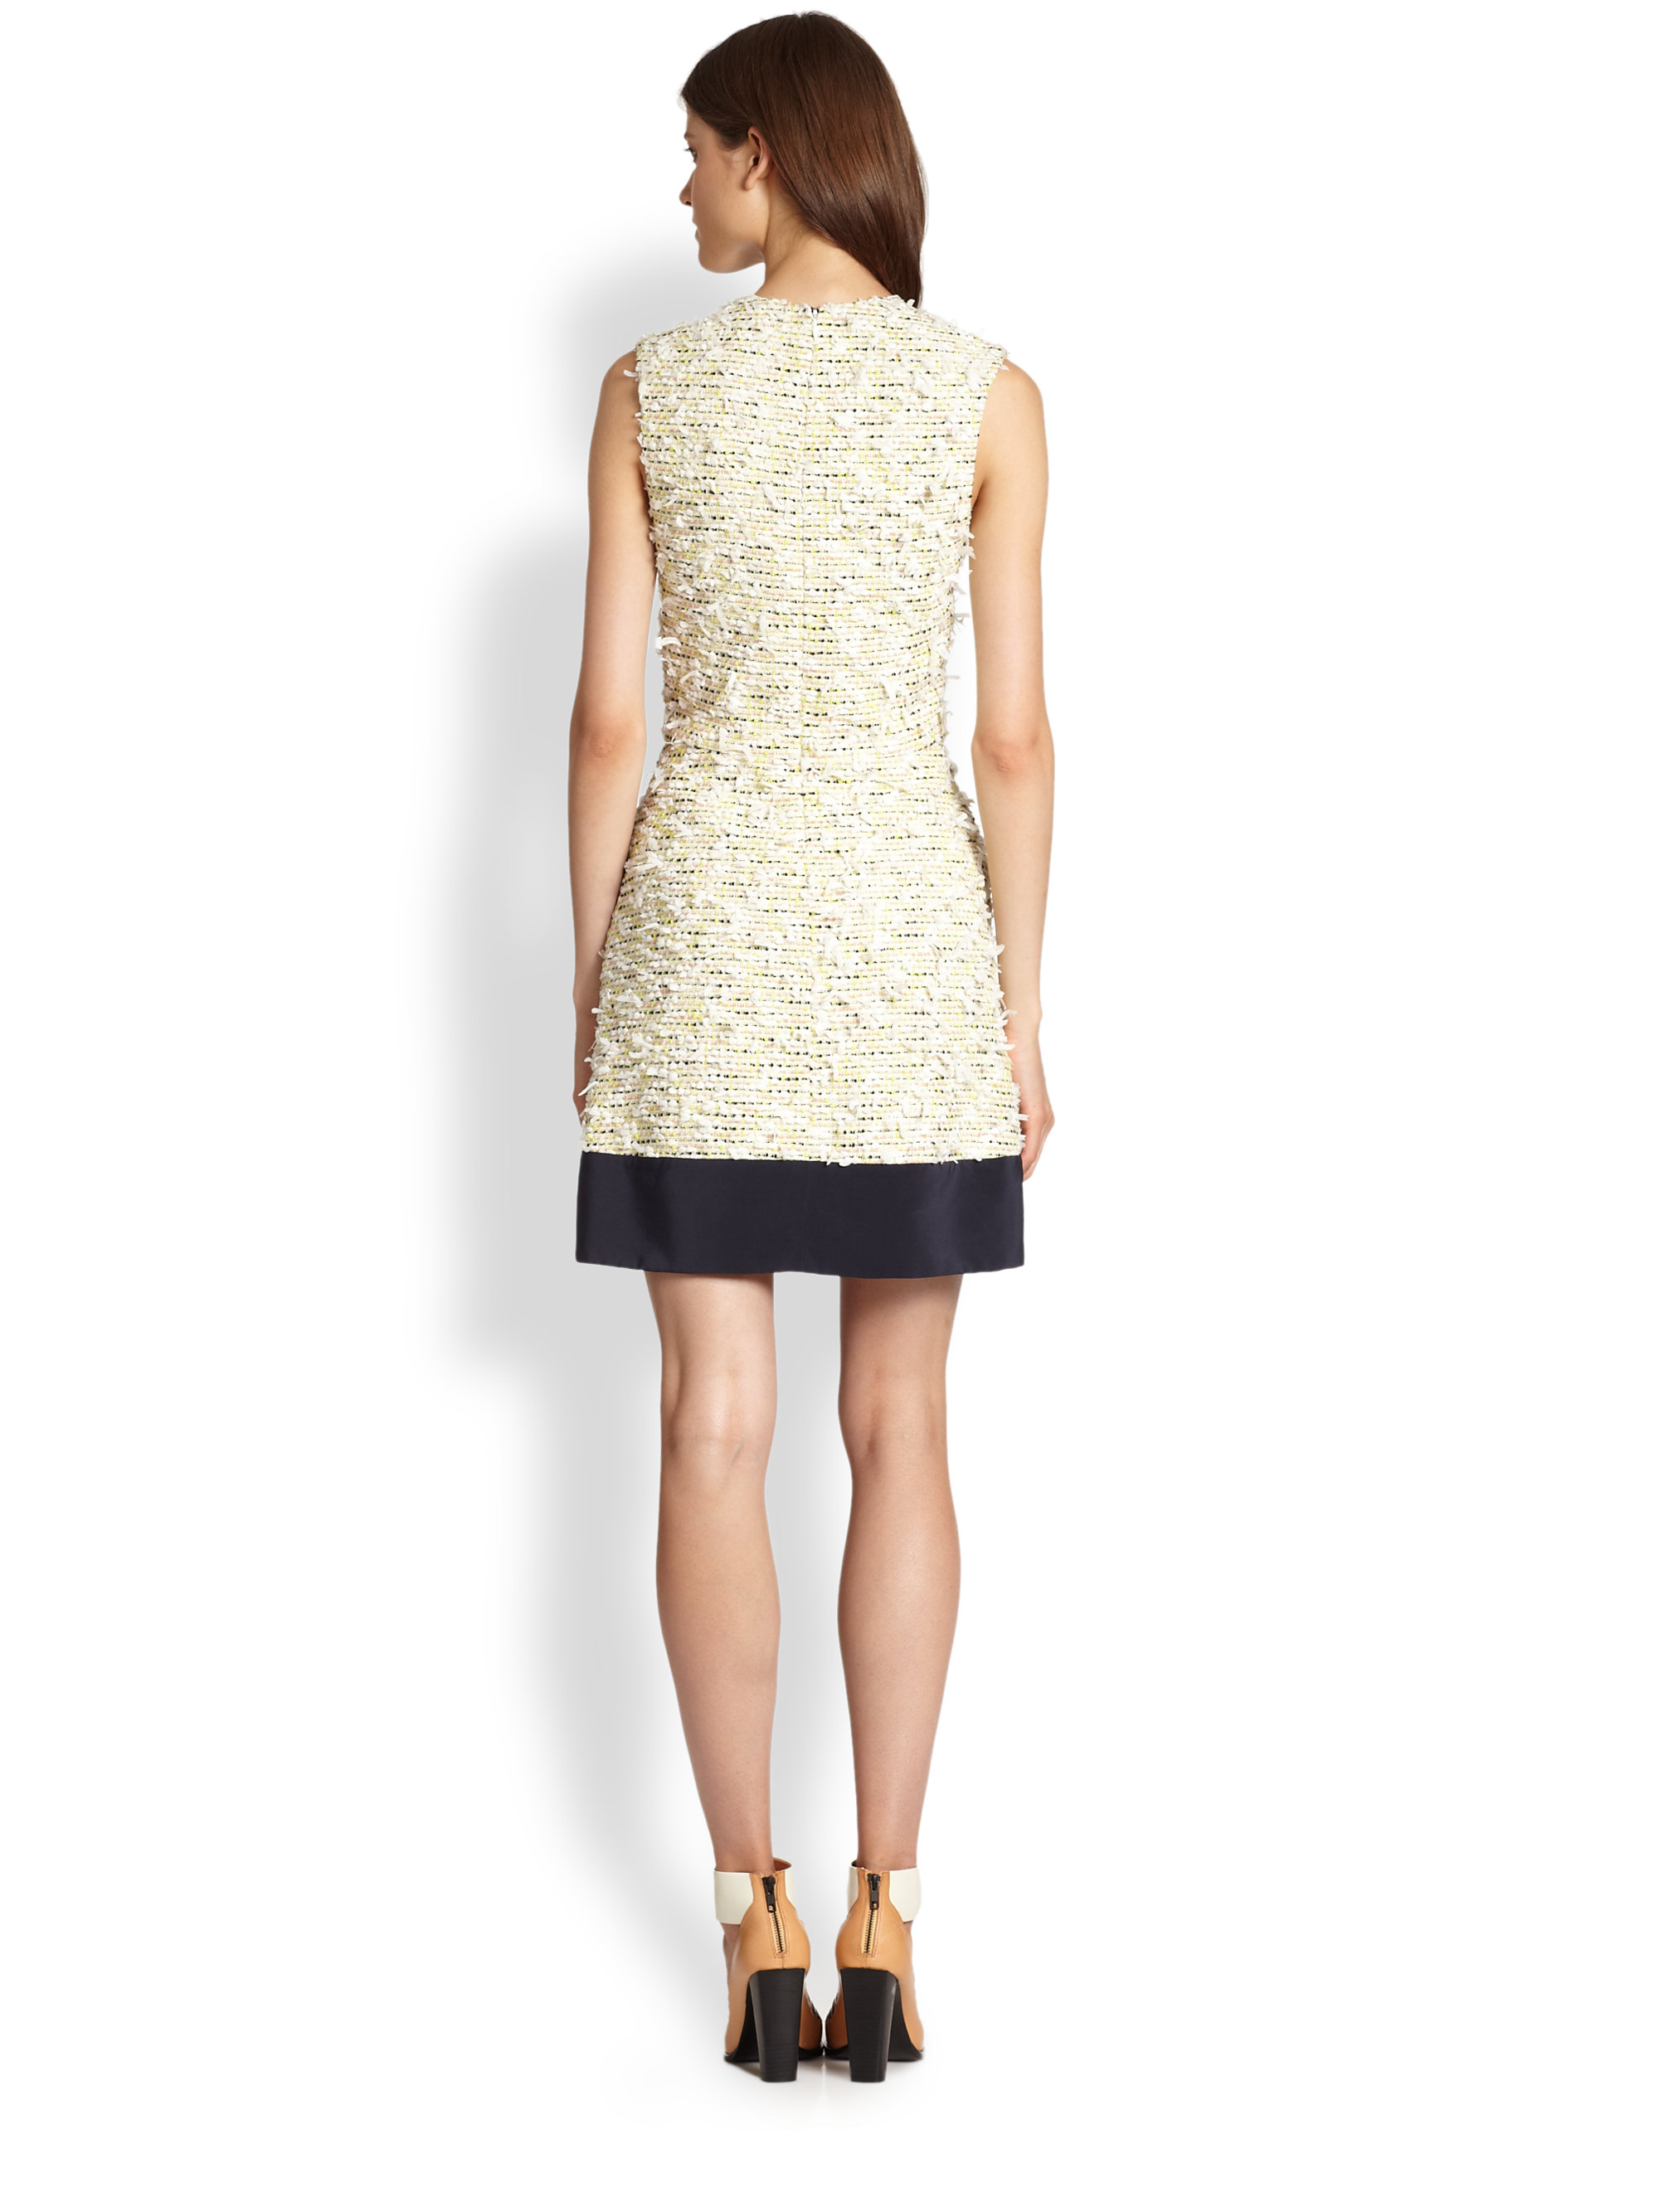 Lyst - 3.1 phillip lim Silktrimmed Frayed Boucle Dress in Natural